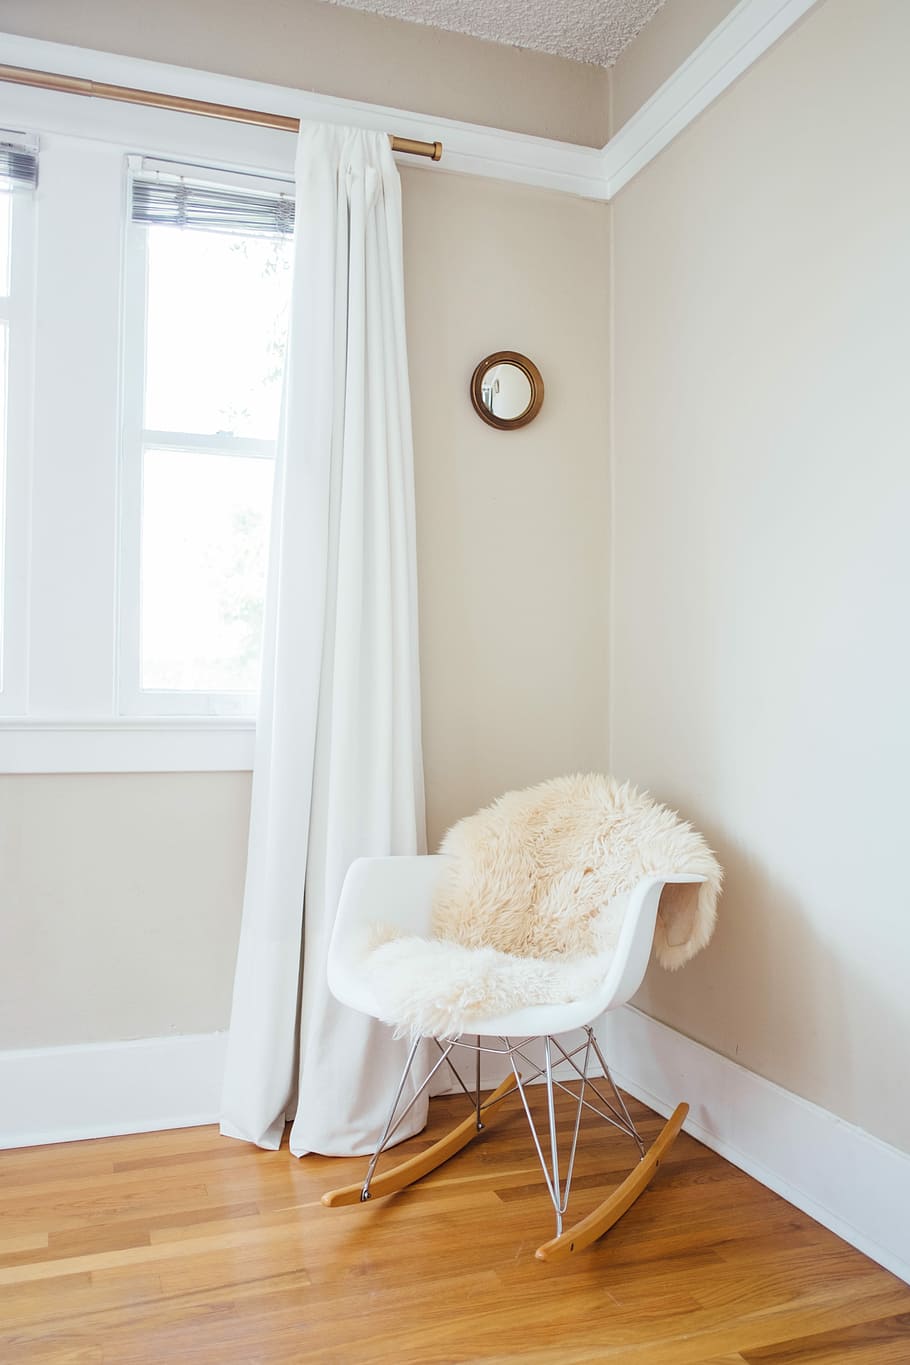 Hd Wallpaper White And Brown Rocking Chair Near White Painted